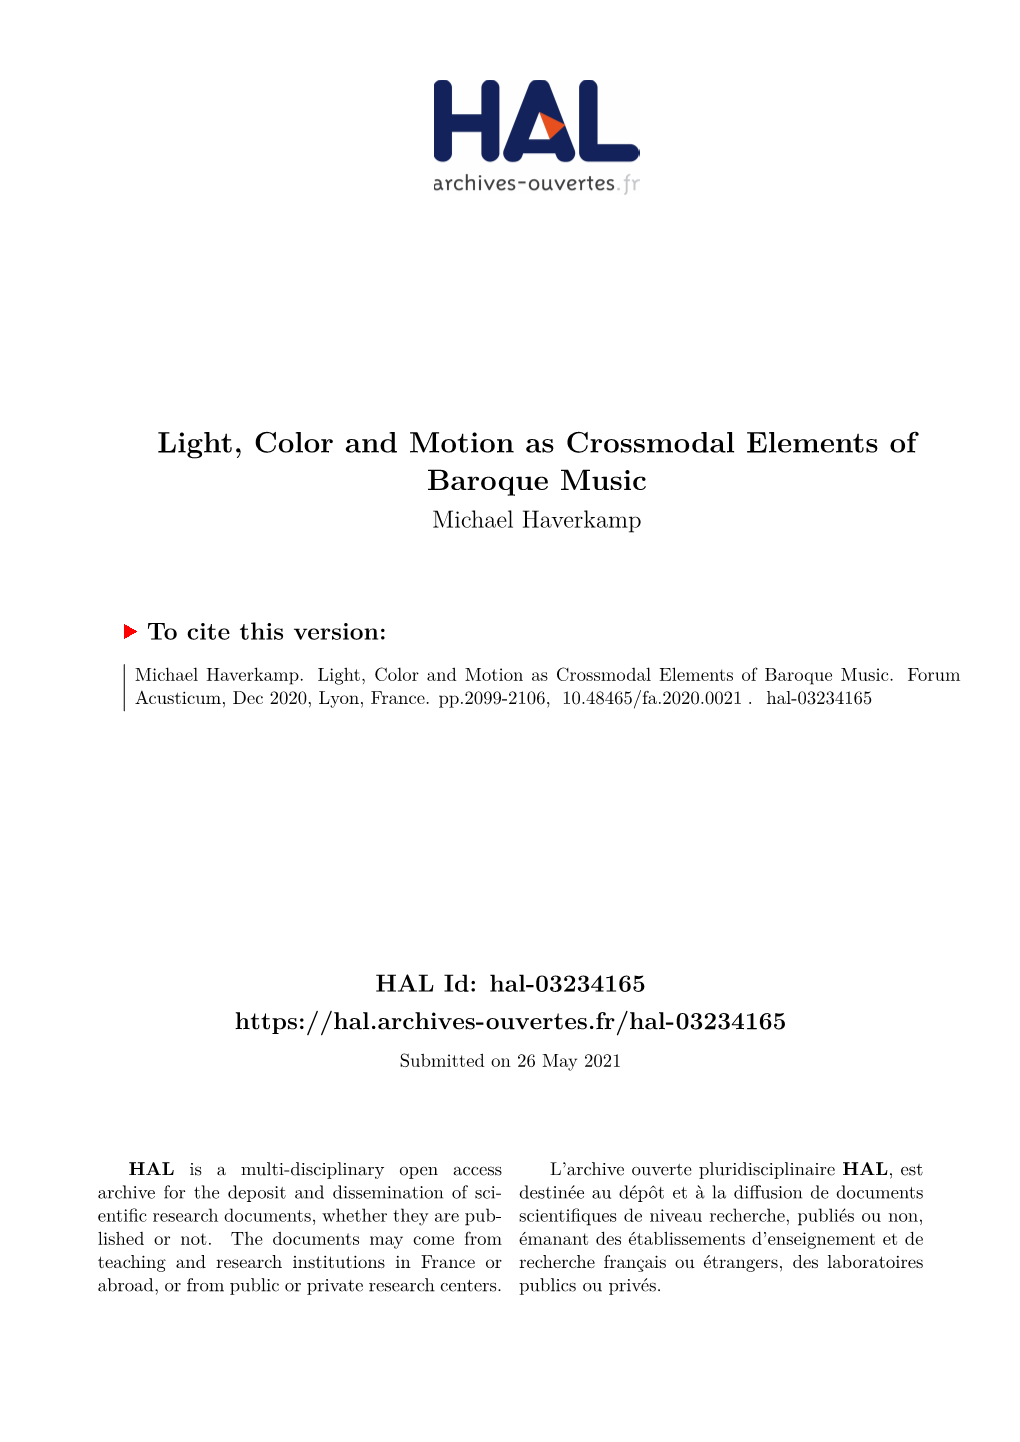 Light, Color and Motion As Crossmodal Elements of Baroque Music Michael Haverkamp